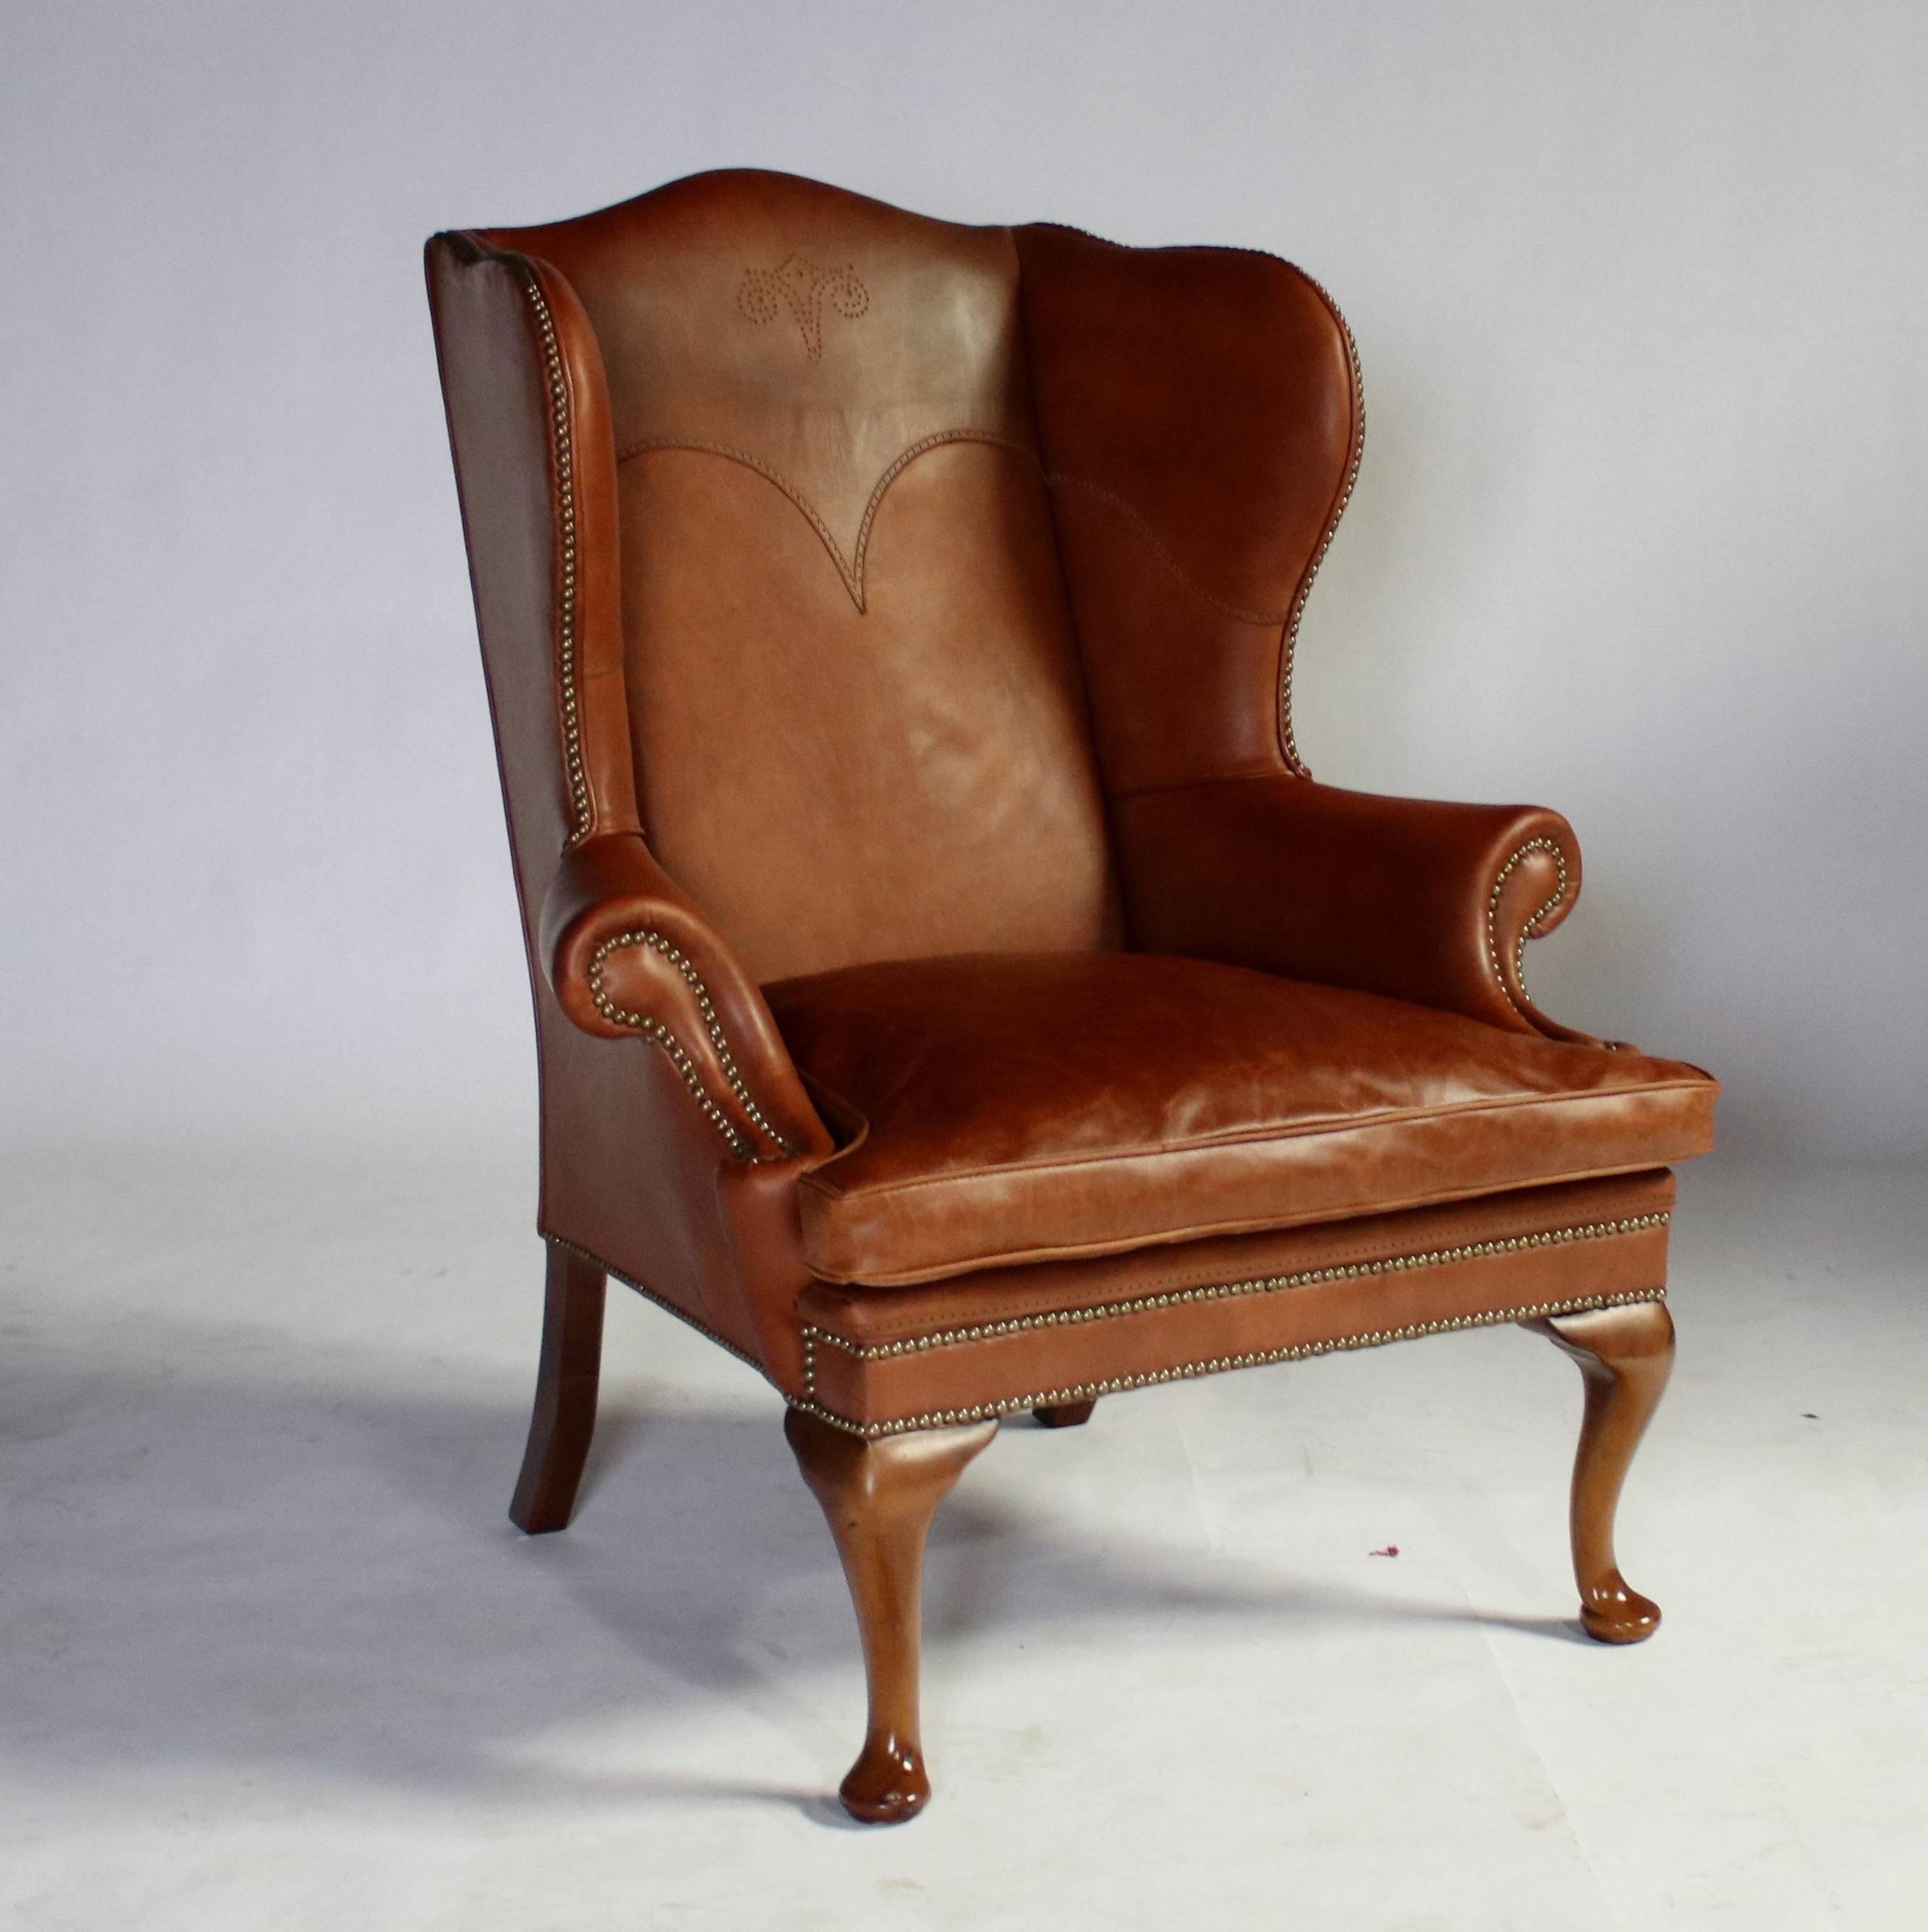 George I style wingback leather chair by Ralph Lauren with cabriolet walnut legs and nailheads throughout. A western-style embroidered stitch makes this 1980s example truly unique from some of the earliest furniture pieces by Ralph Lauren. The